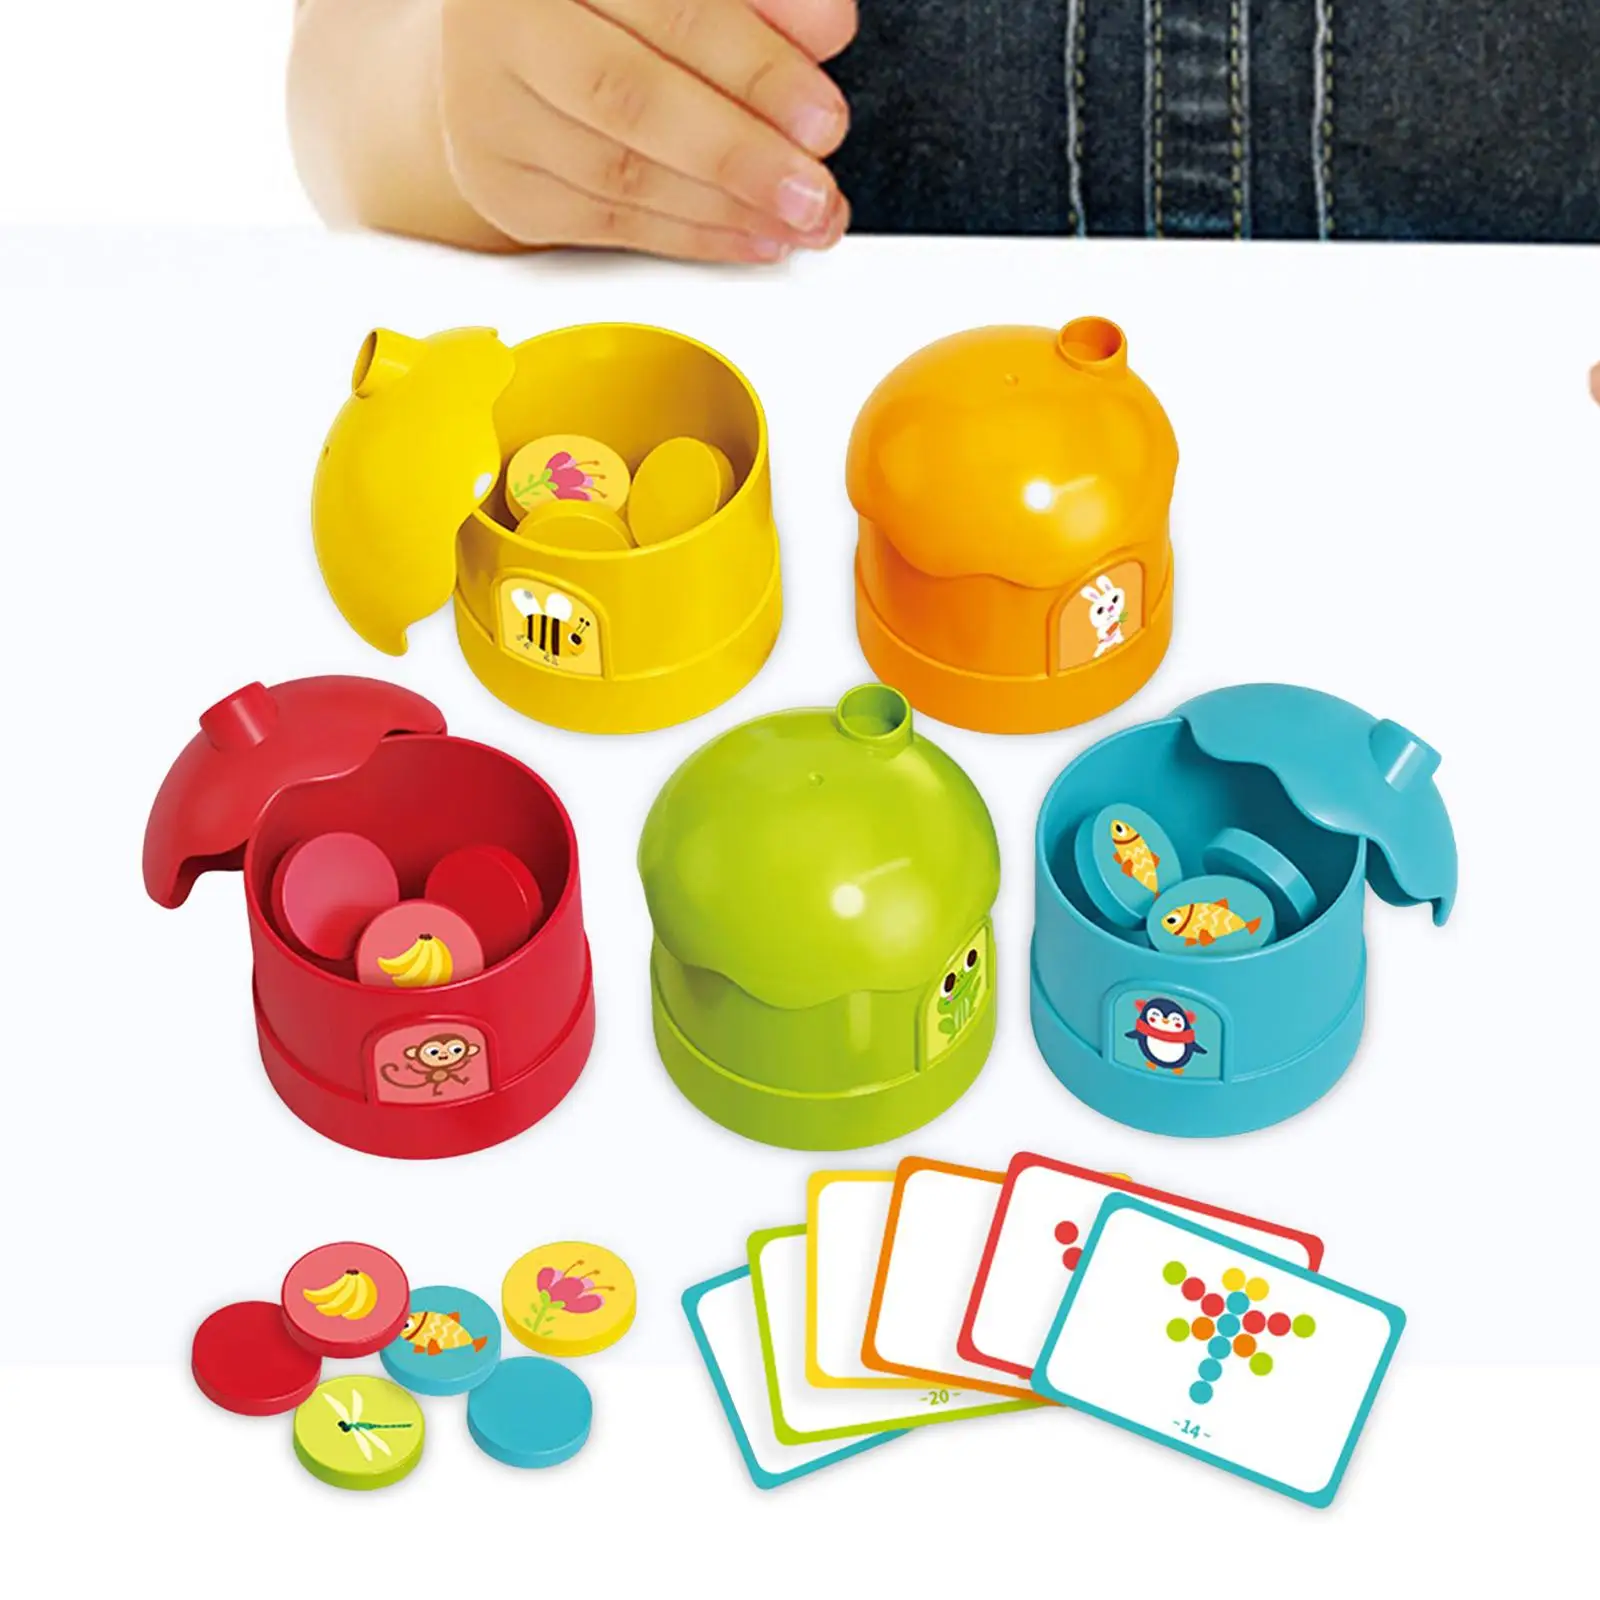 Sorting Cup Practical Math Teaching Aids Matching Game Birthday Gift for Activities